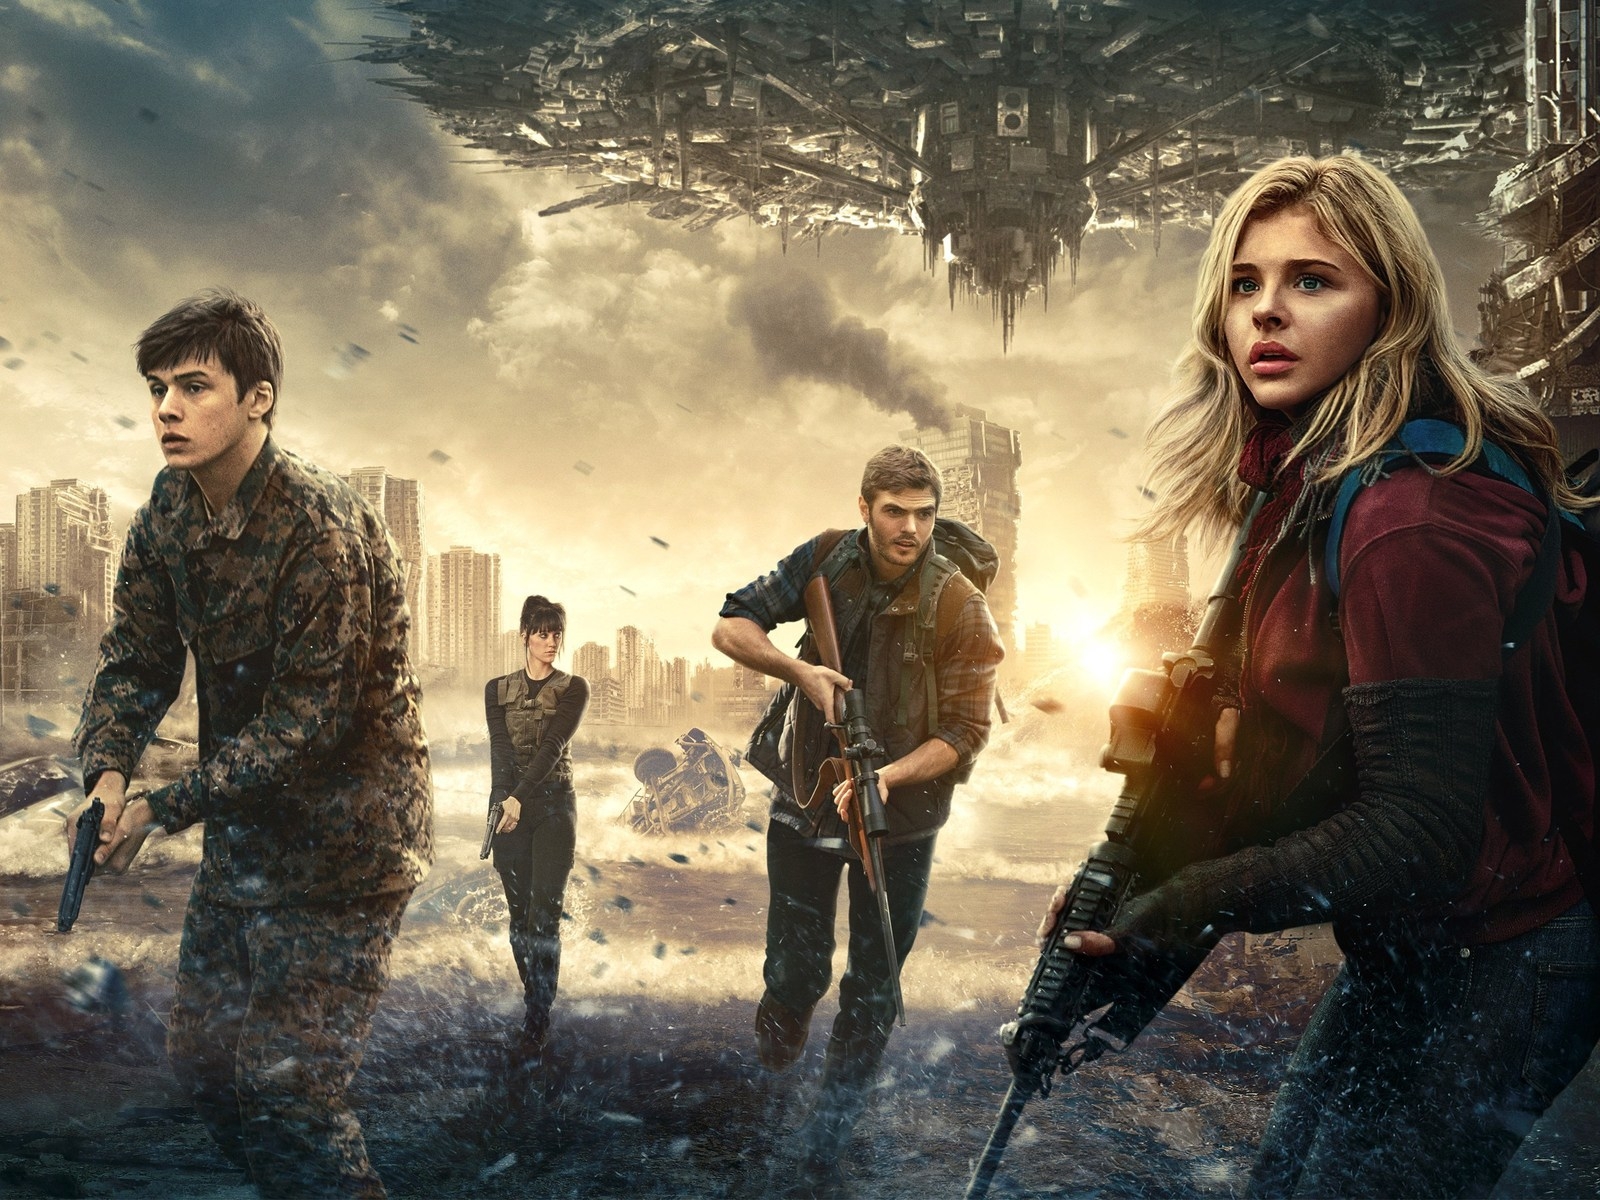 The 5th Wave Film 2016 for 1600 x 1200 resolution